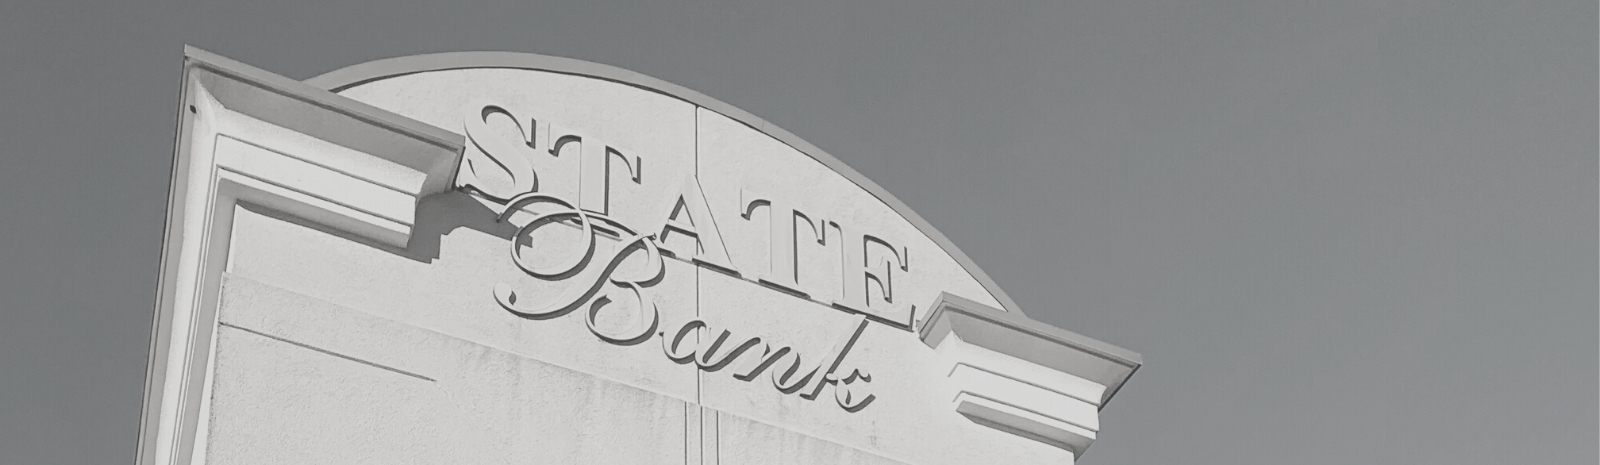 Black and white image of State Bank building